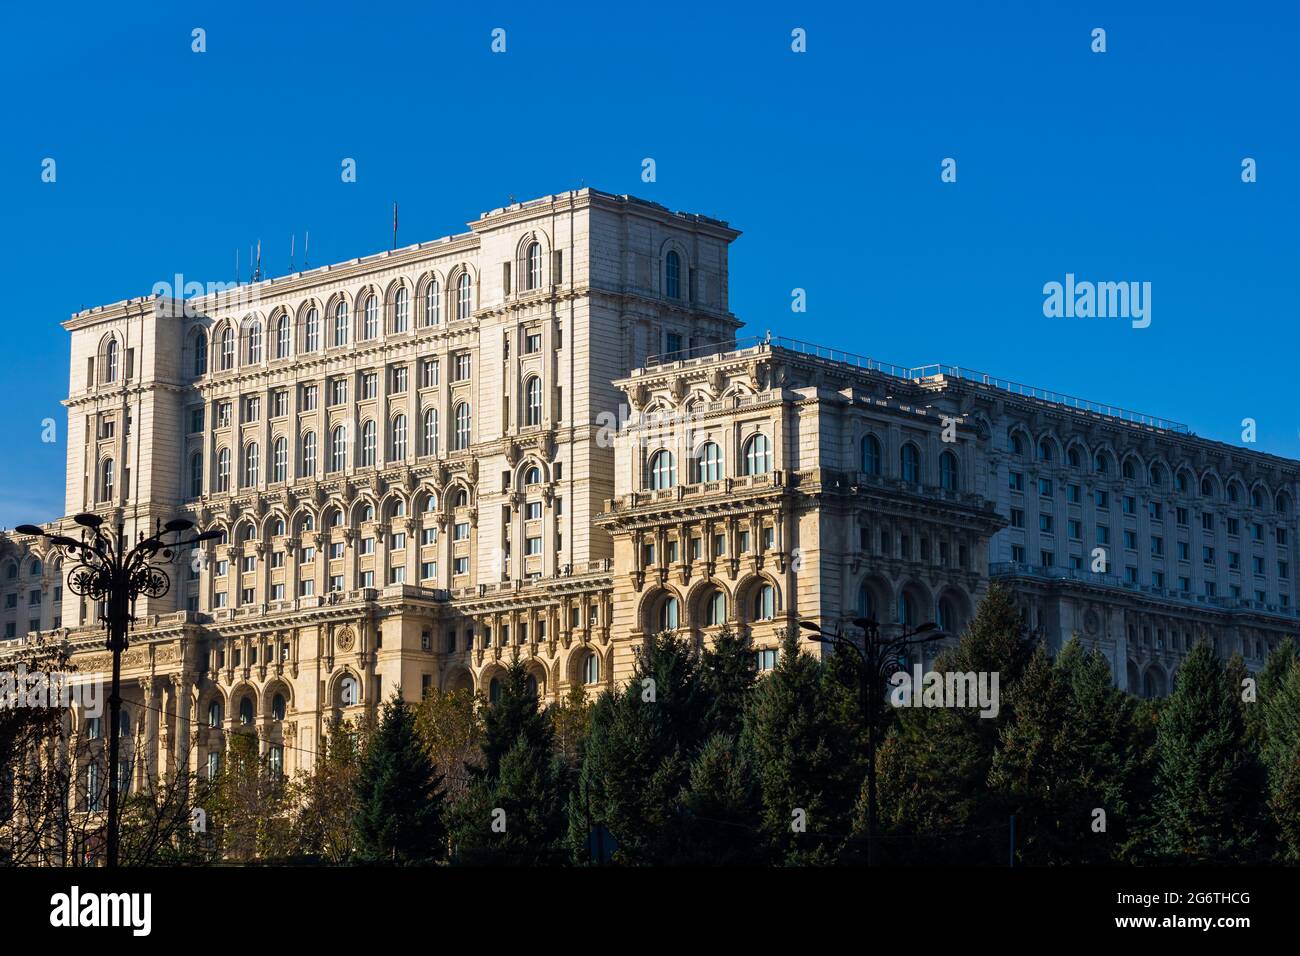 Palace of Parliament at night time, Bucharest, Romania Stock Photo